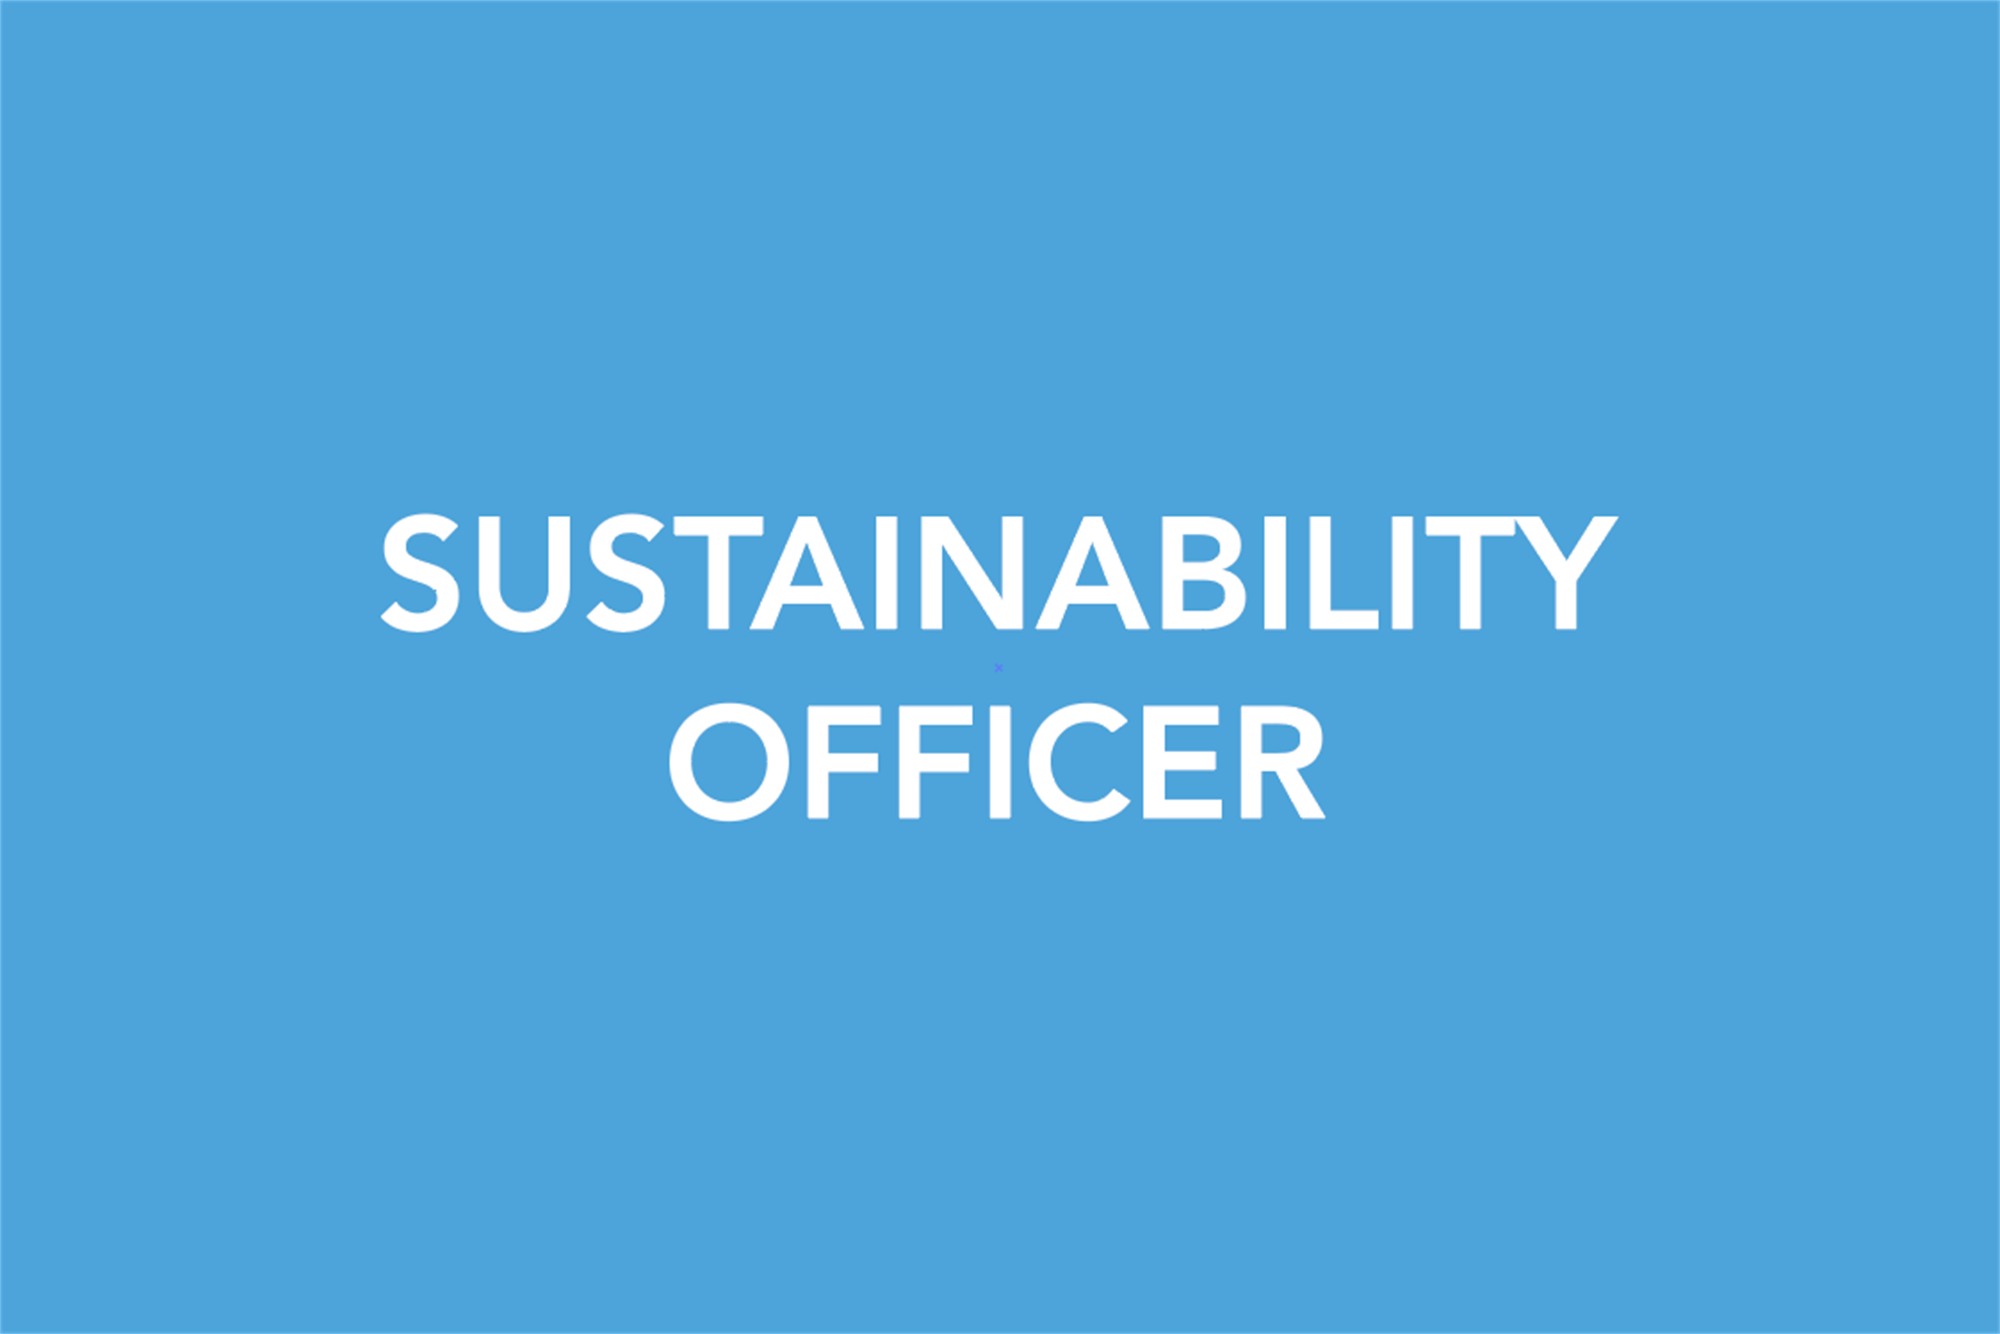 SUSTAINABILITY OFFICER